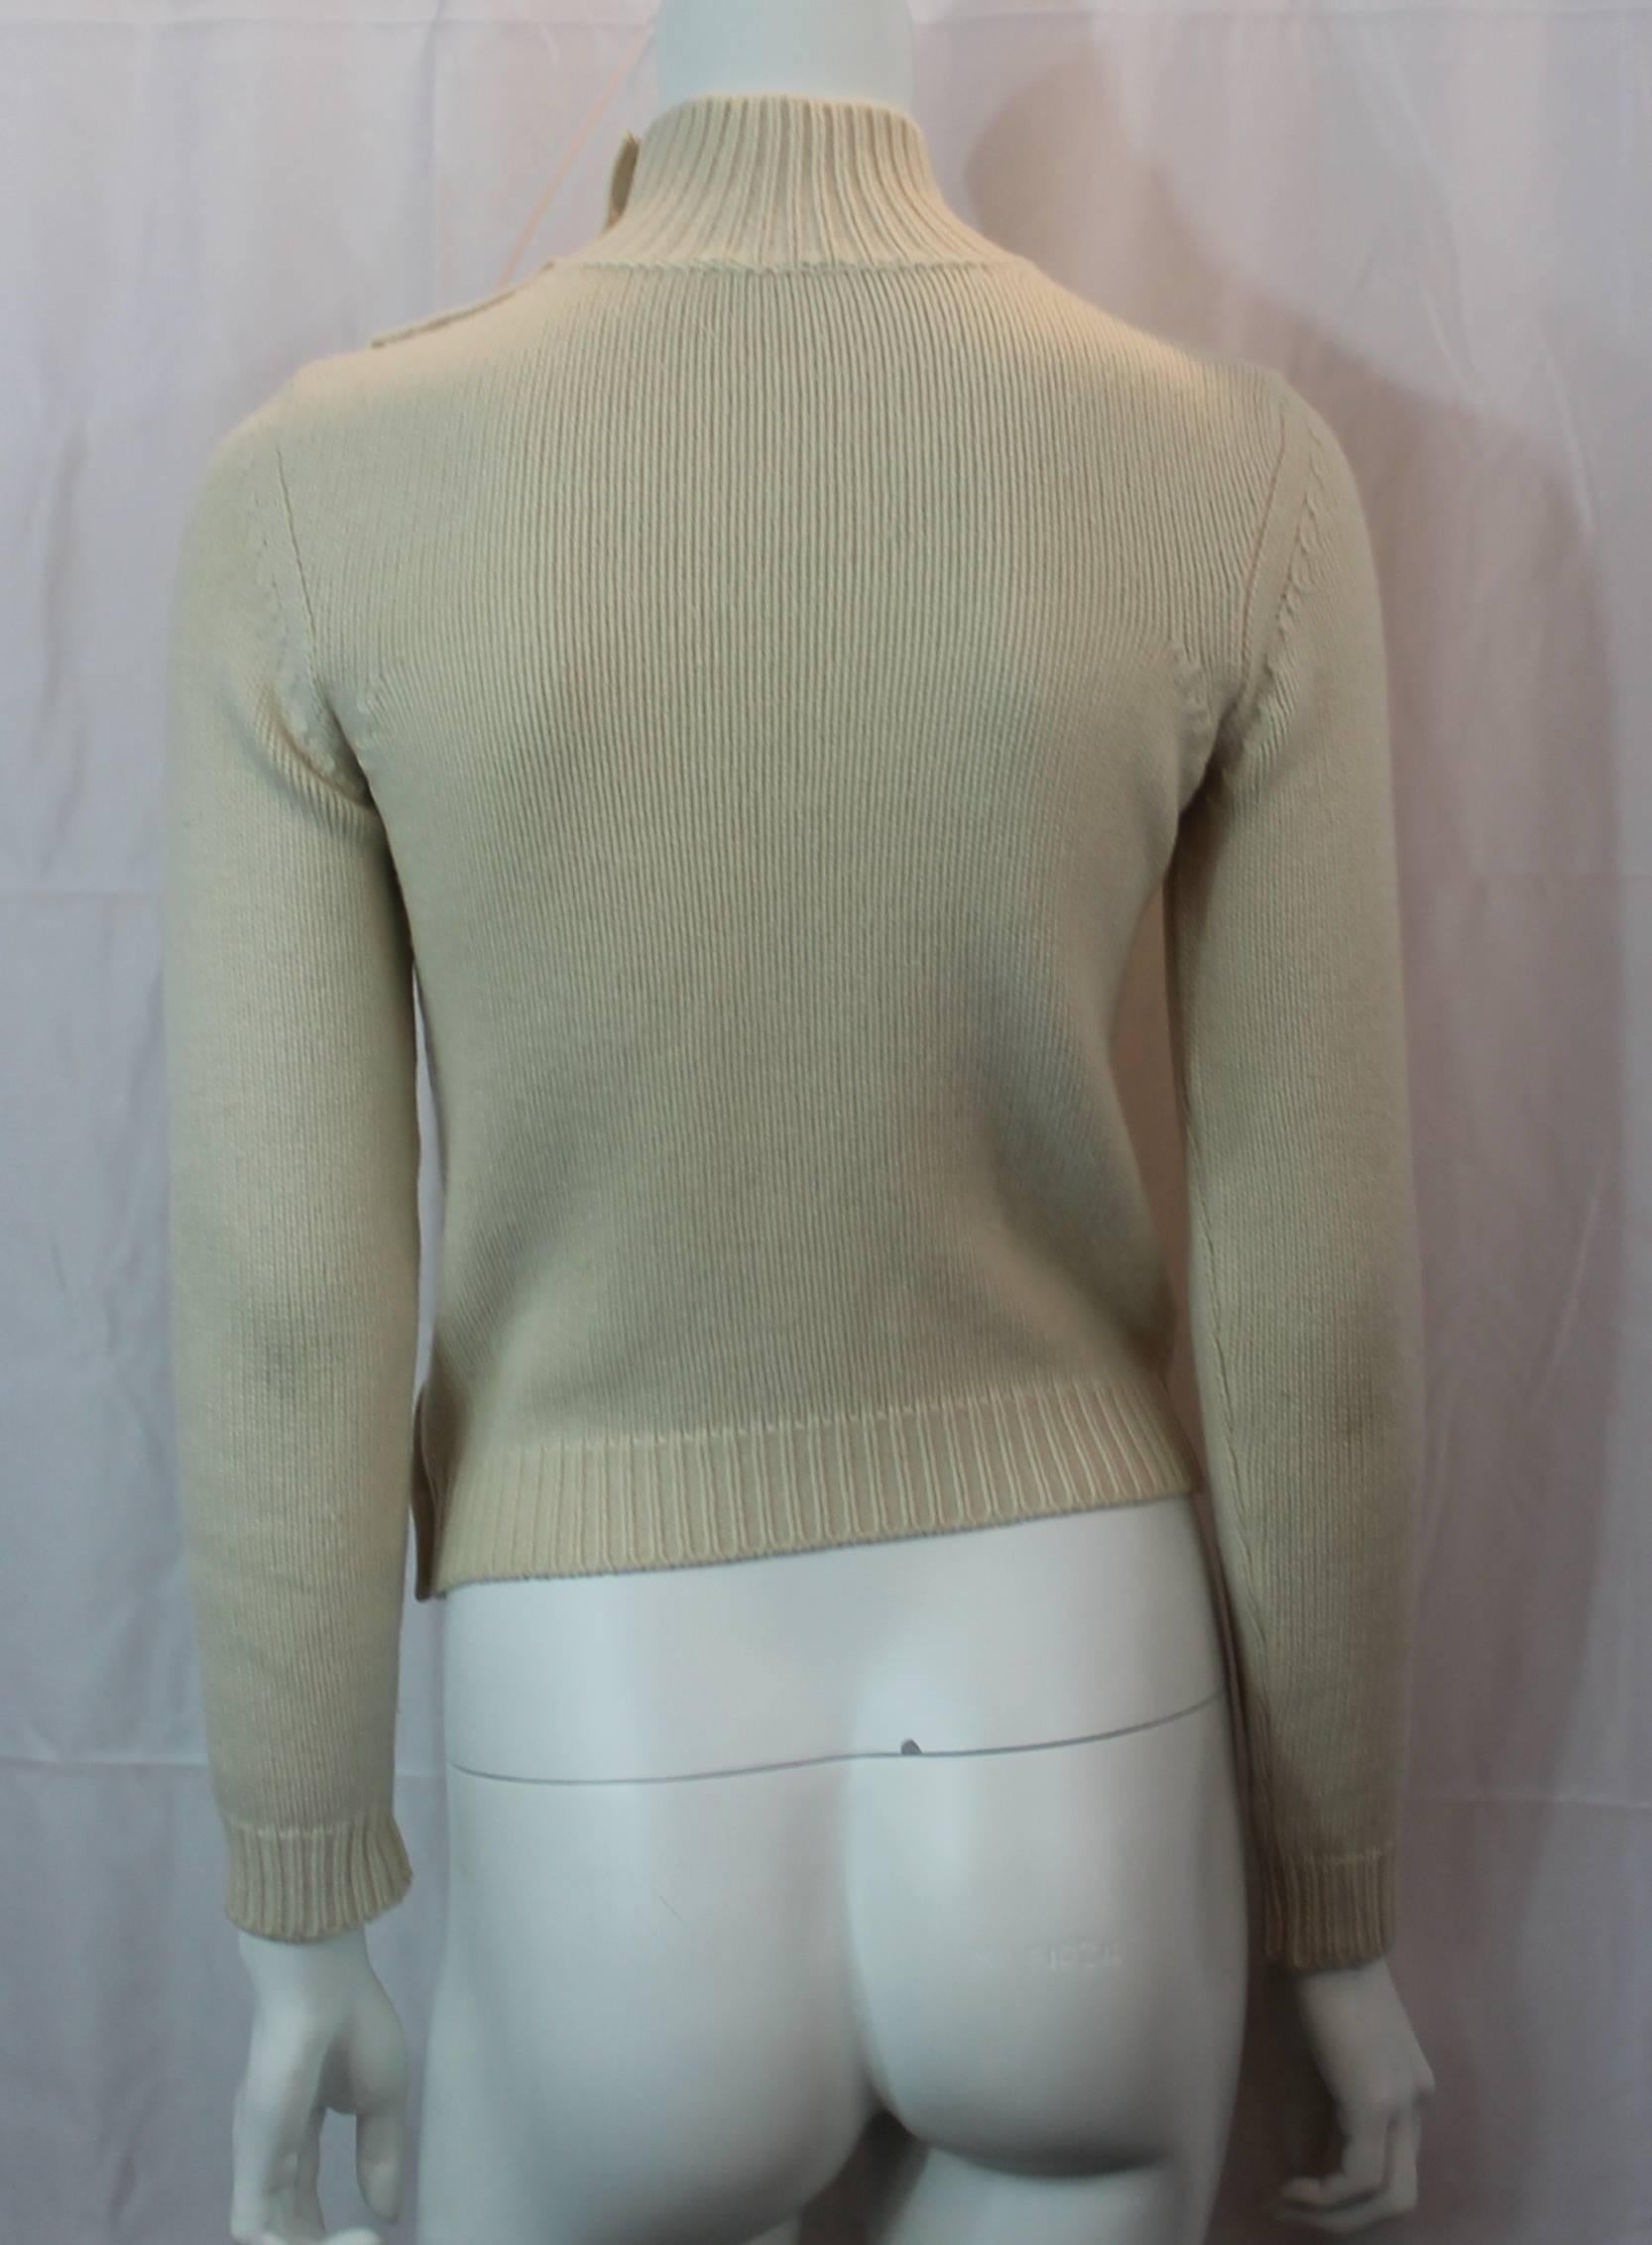 Chanel Ivory Cashmere Knitted Turtleneck with Gold Button Details - 36 ...